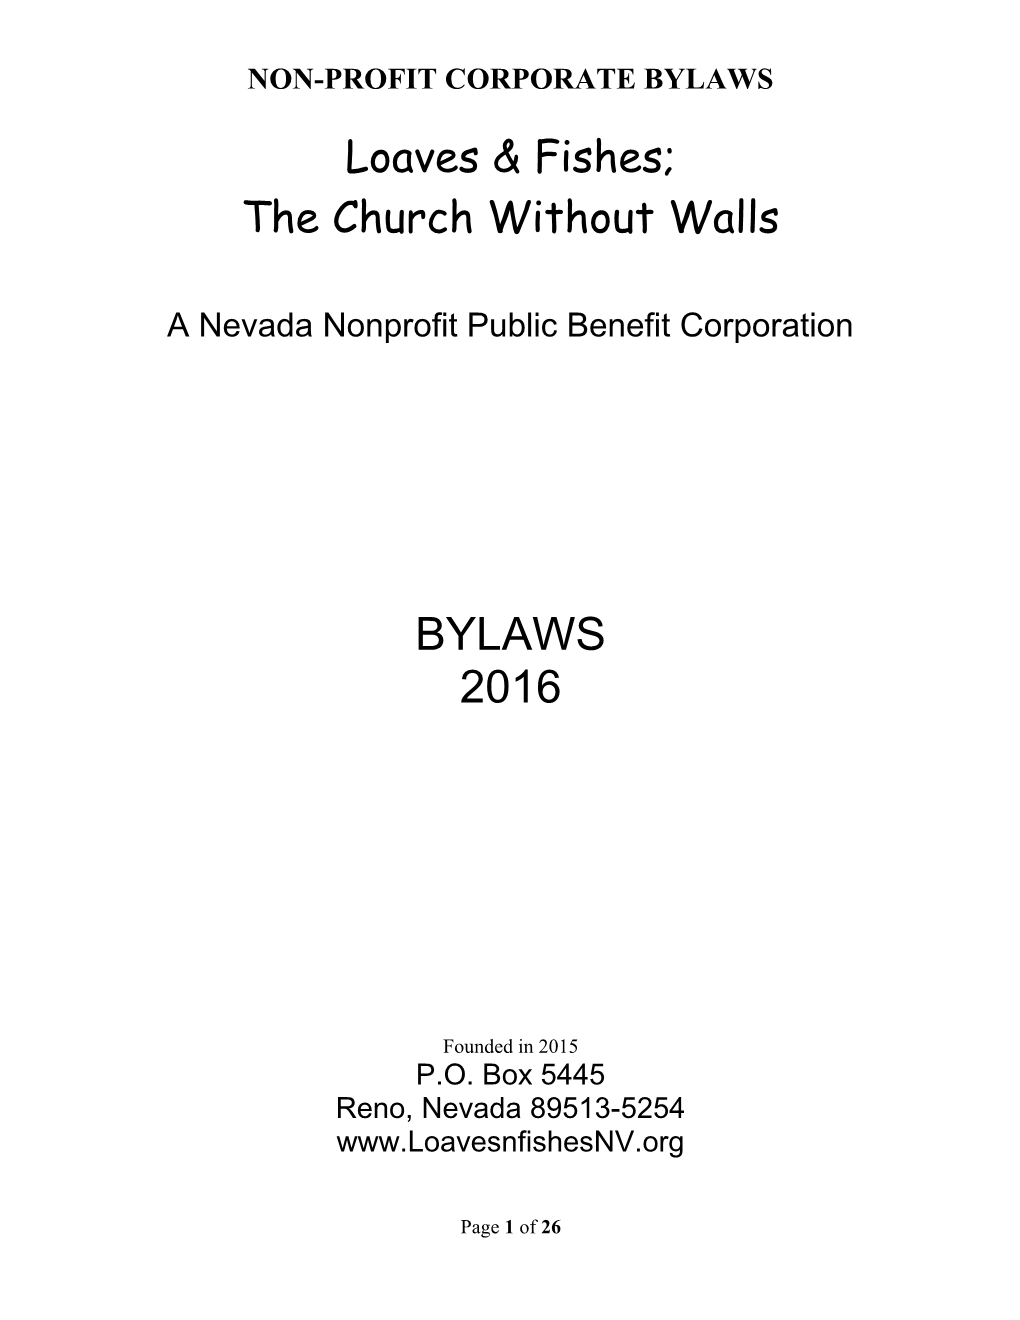 Non-Profit Corporate Bylaws